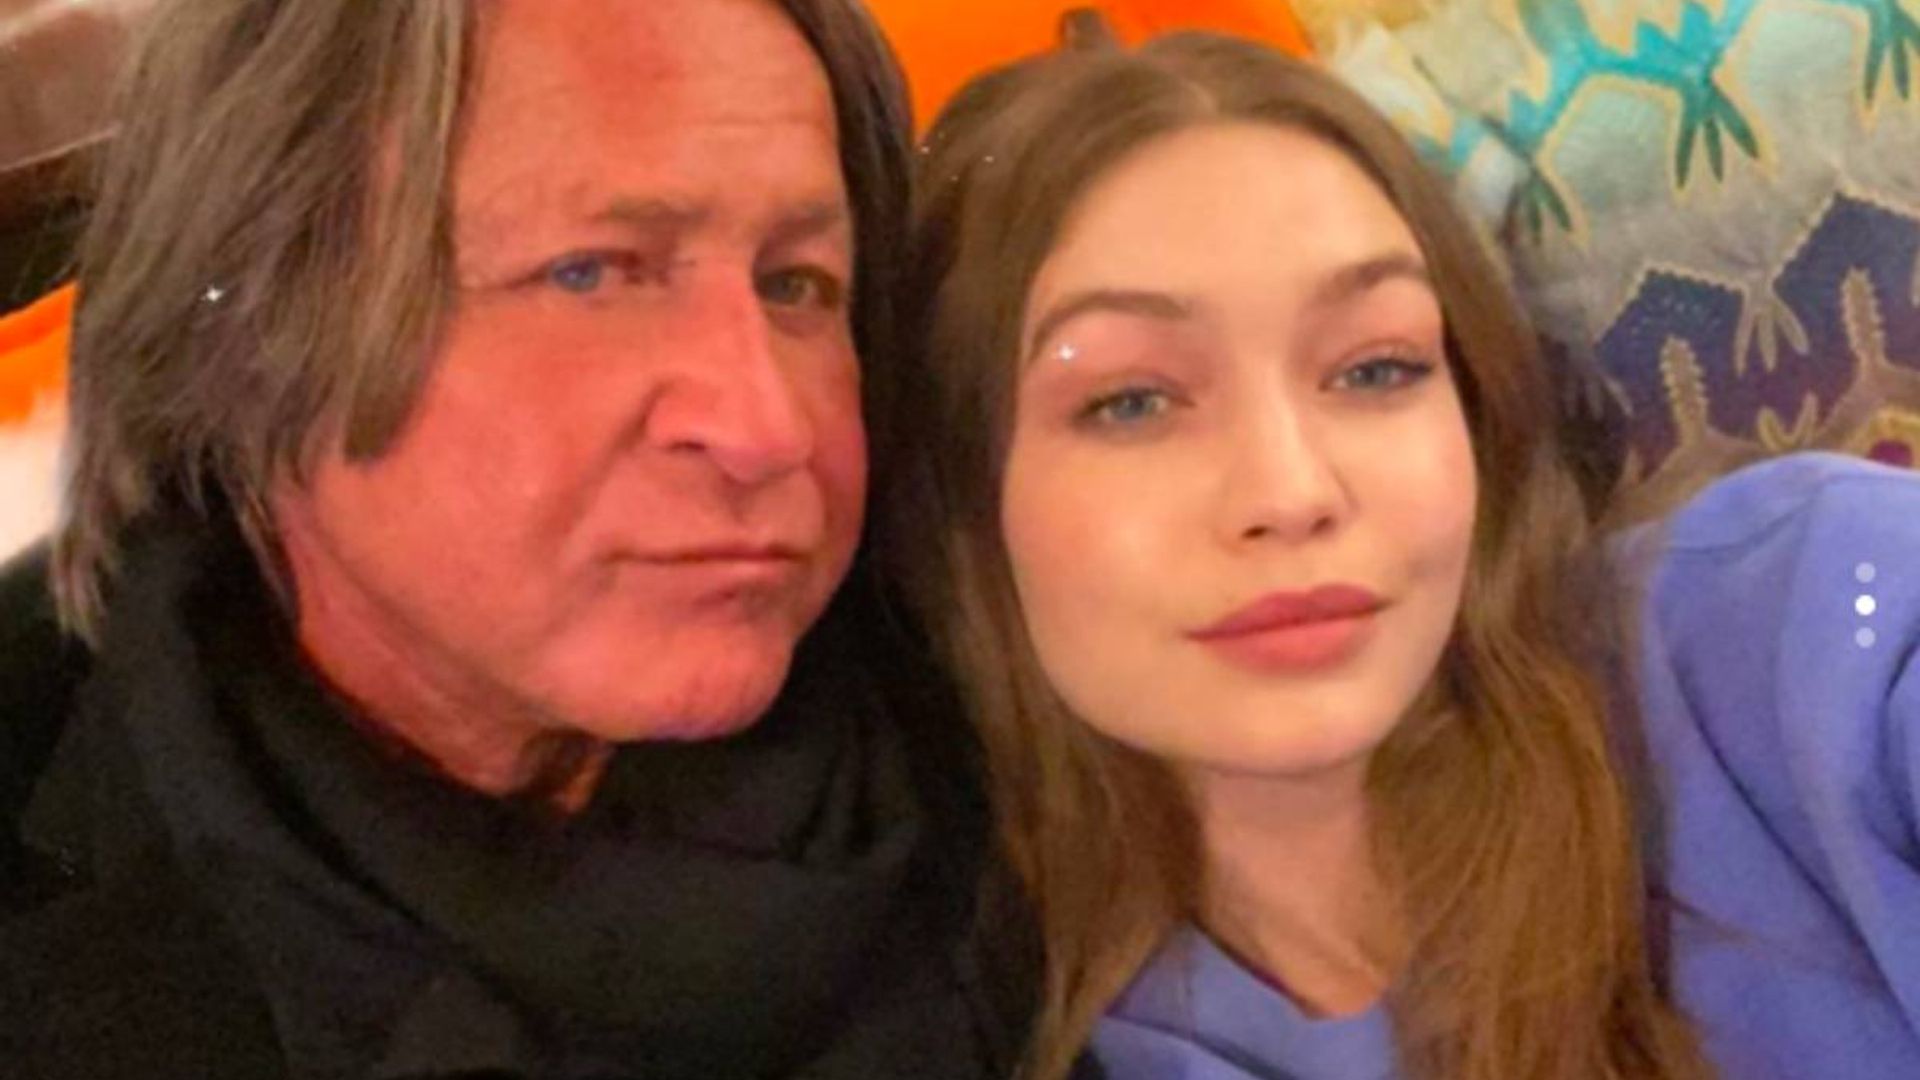 Gigi Hadid's dad shares sweet family photo ahead of her baby's arrival to mark special occasion